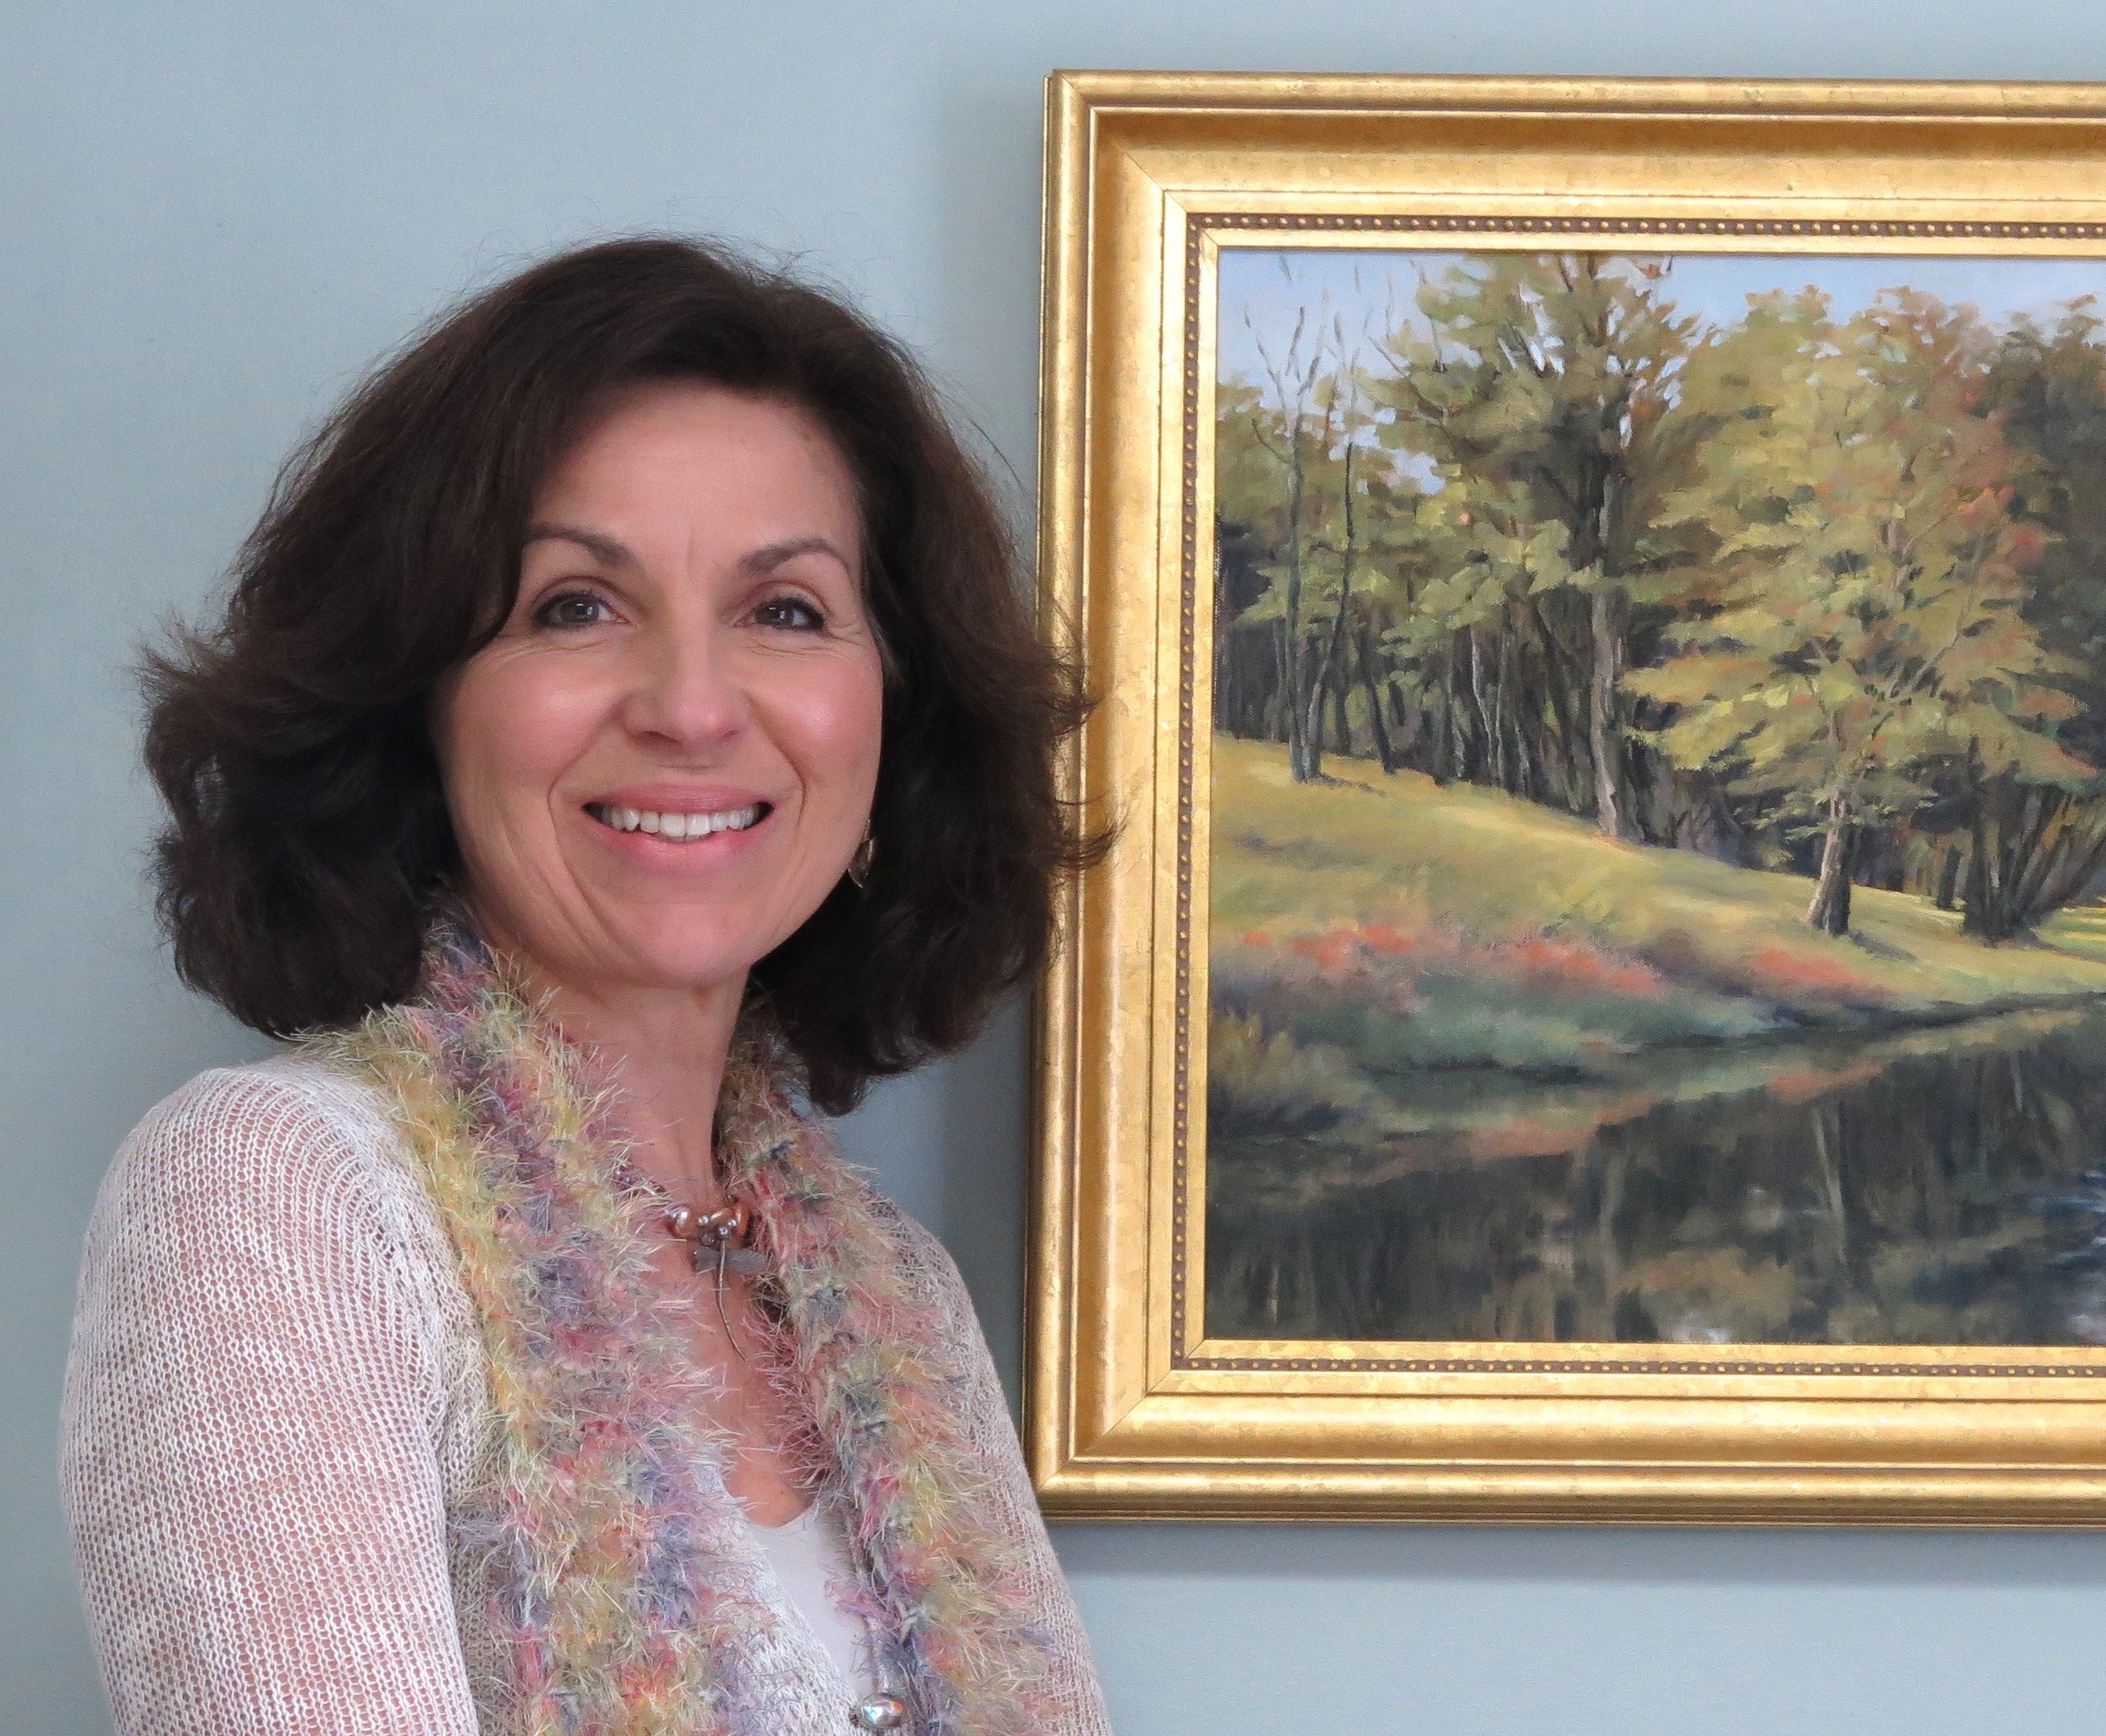 A woman standing in front of a painting.